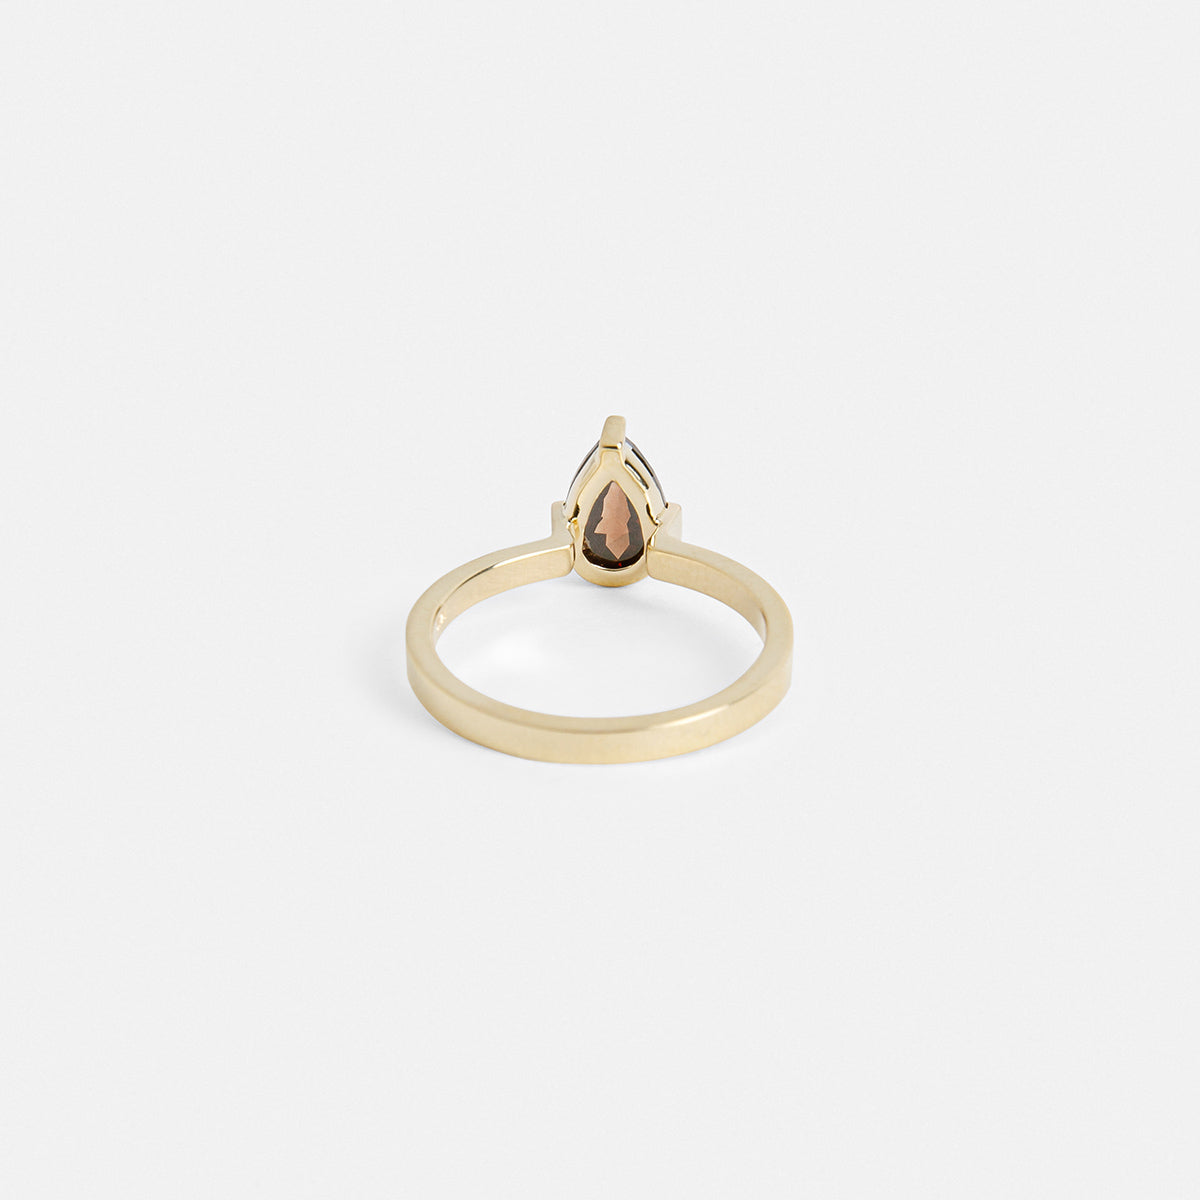 Gerda Non-Traditional Ring in 14k Gold set with a 1.31ct pear-cut cognac natural diamond By SHW Fine Jewelry NYC